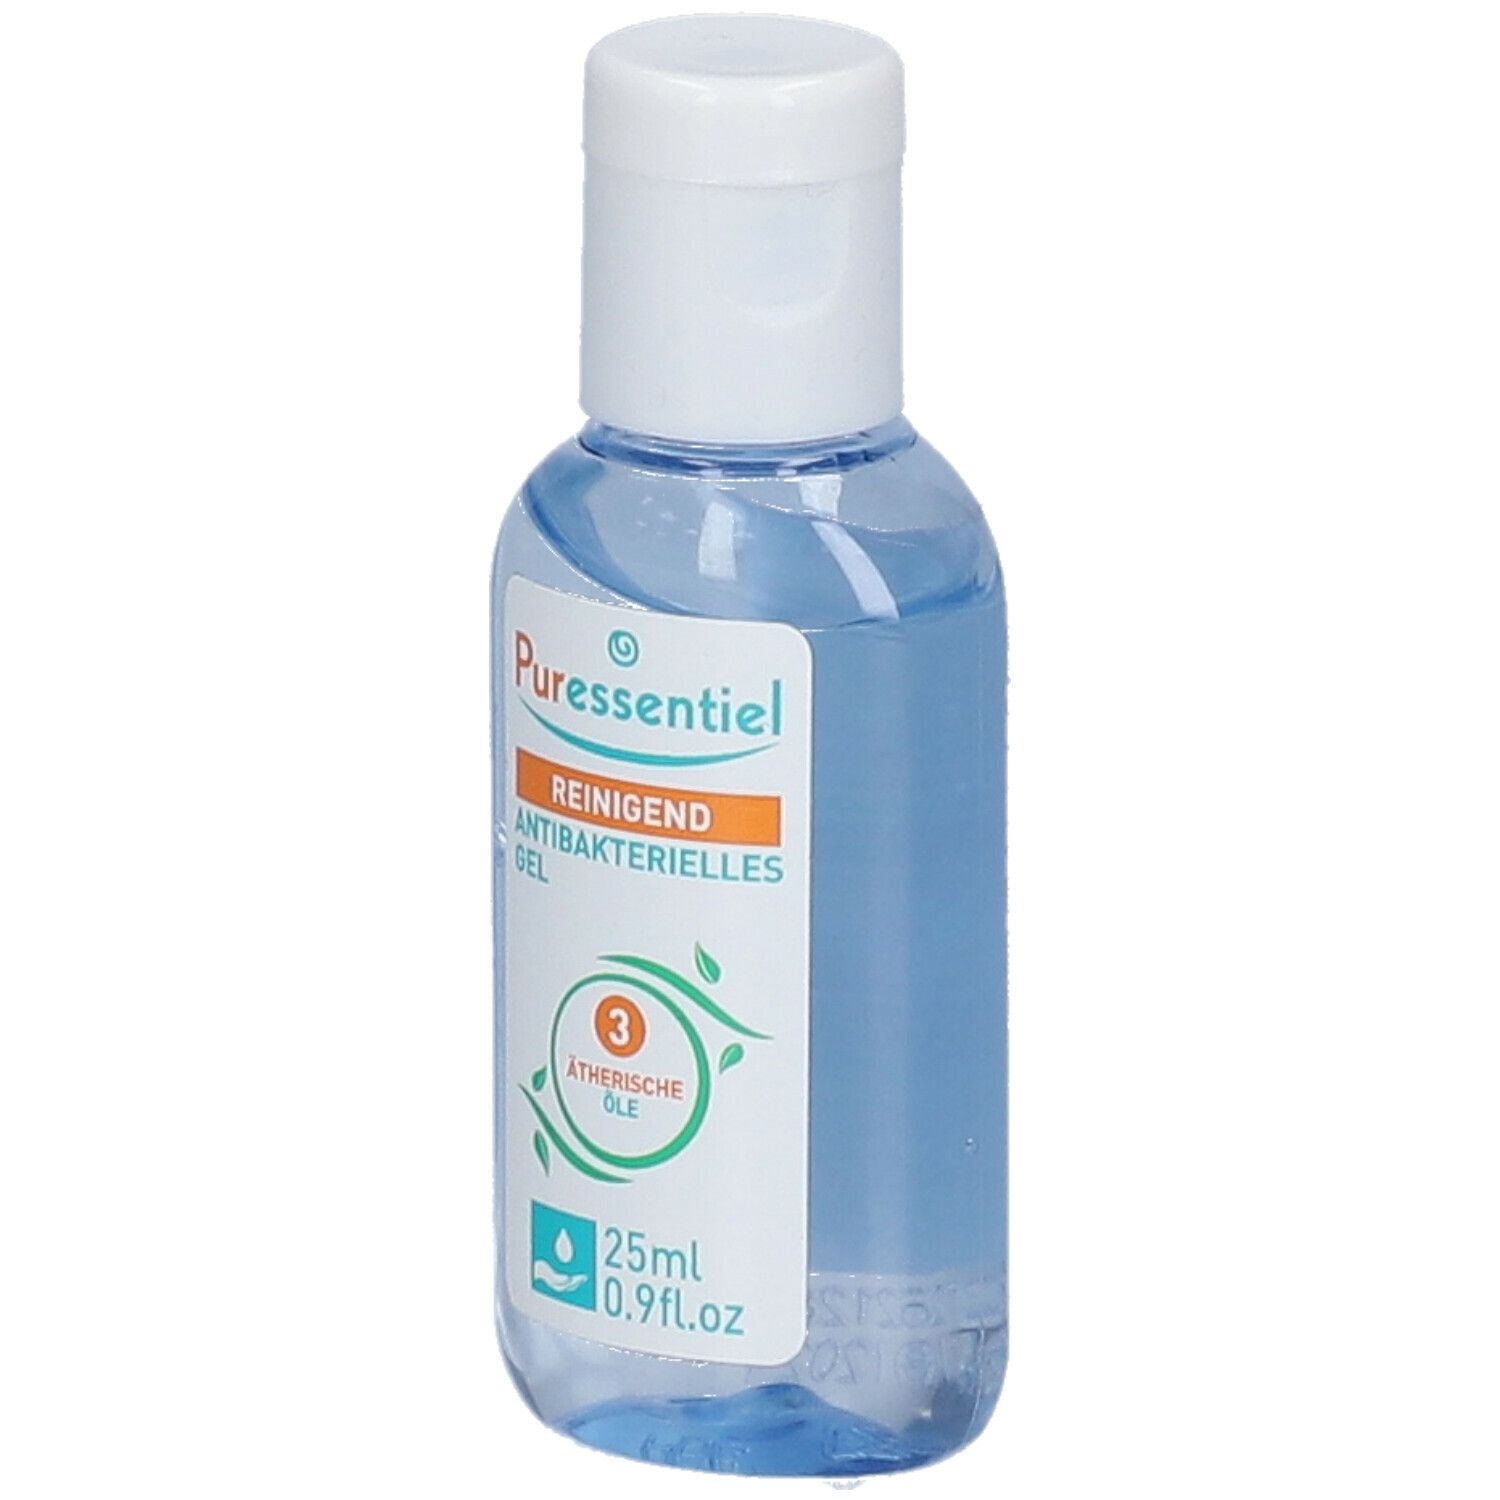 Pure stole cleaning antibacterial gel